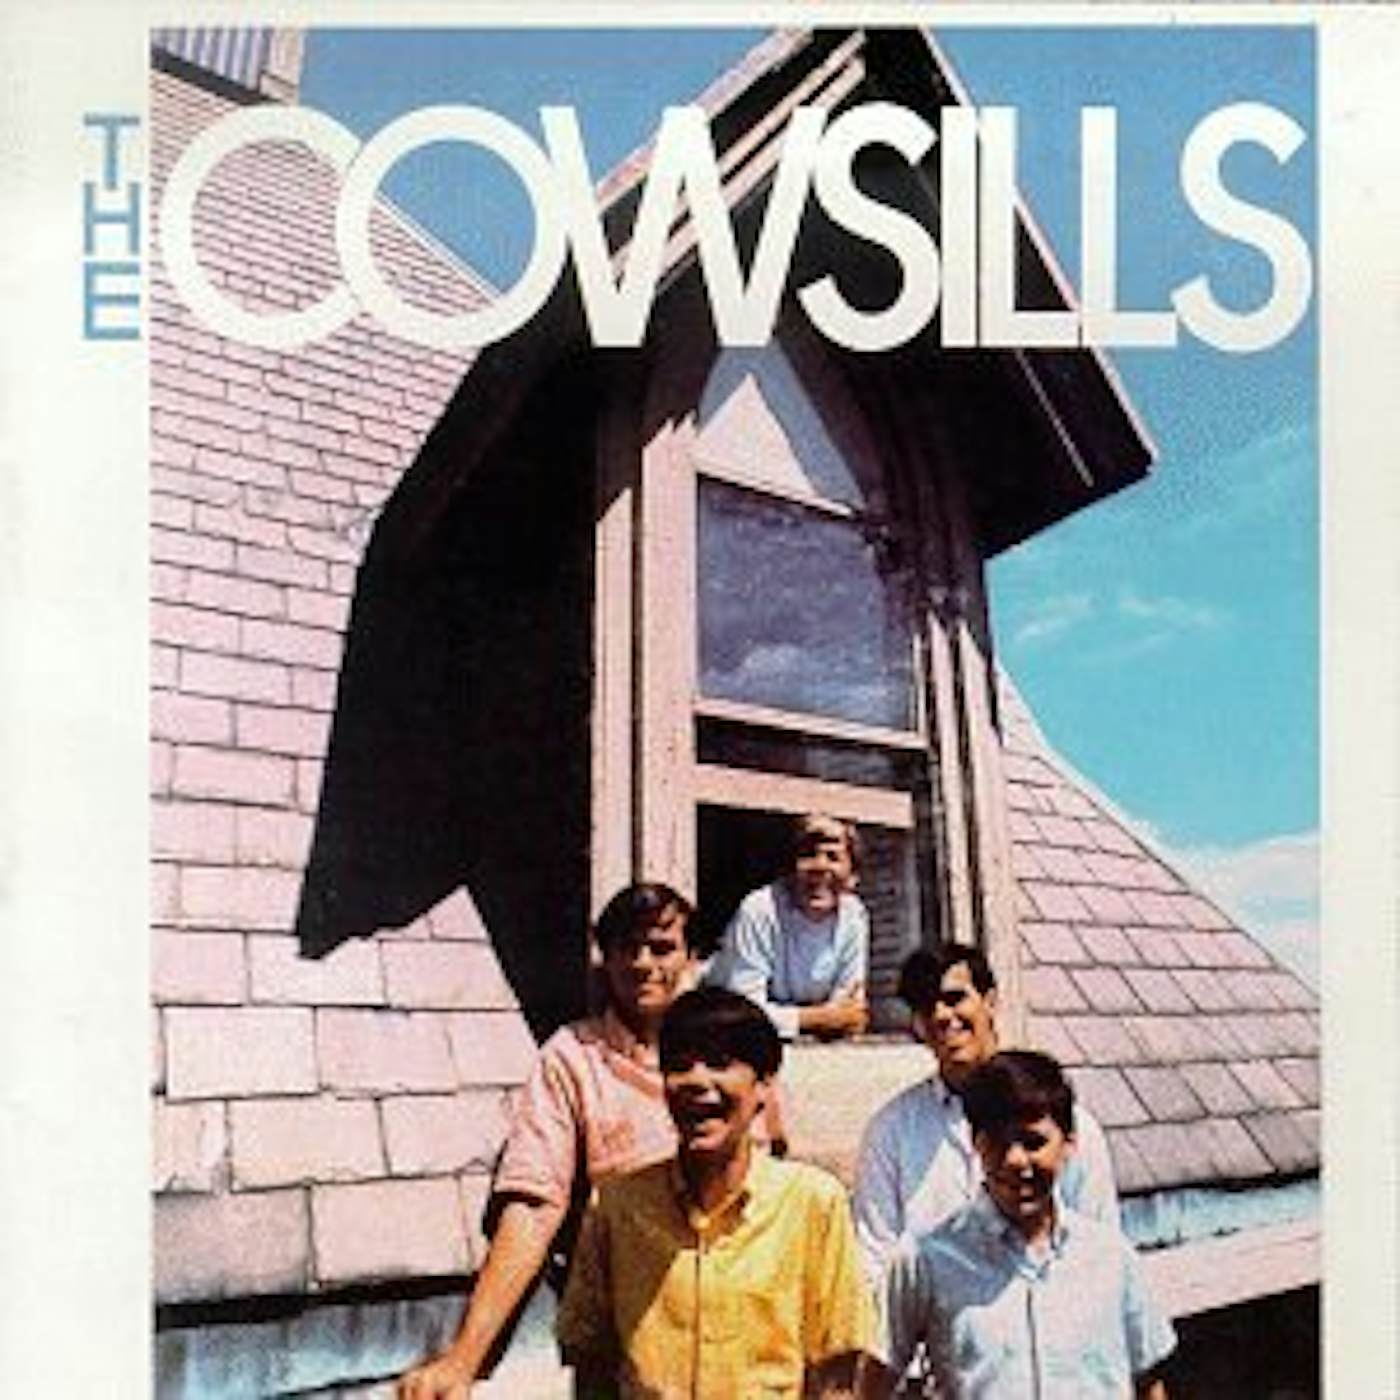 The Cowsills / WE CAN FLY CD